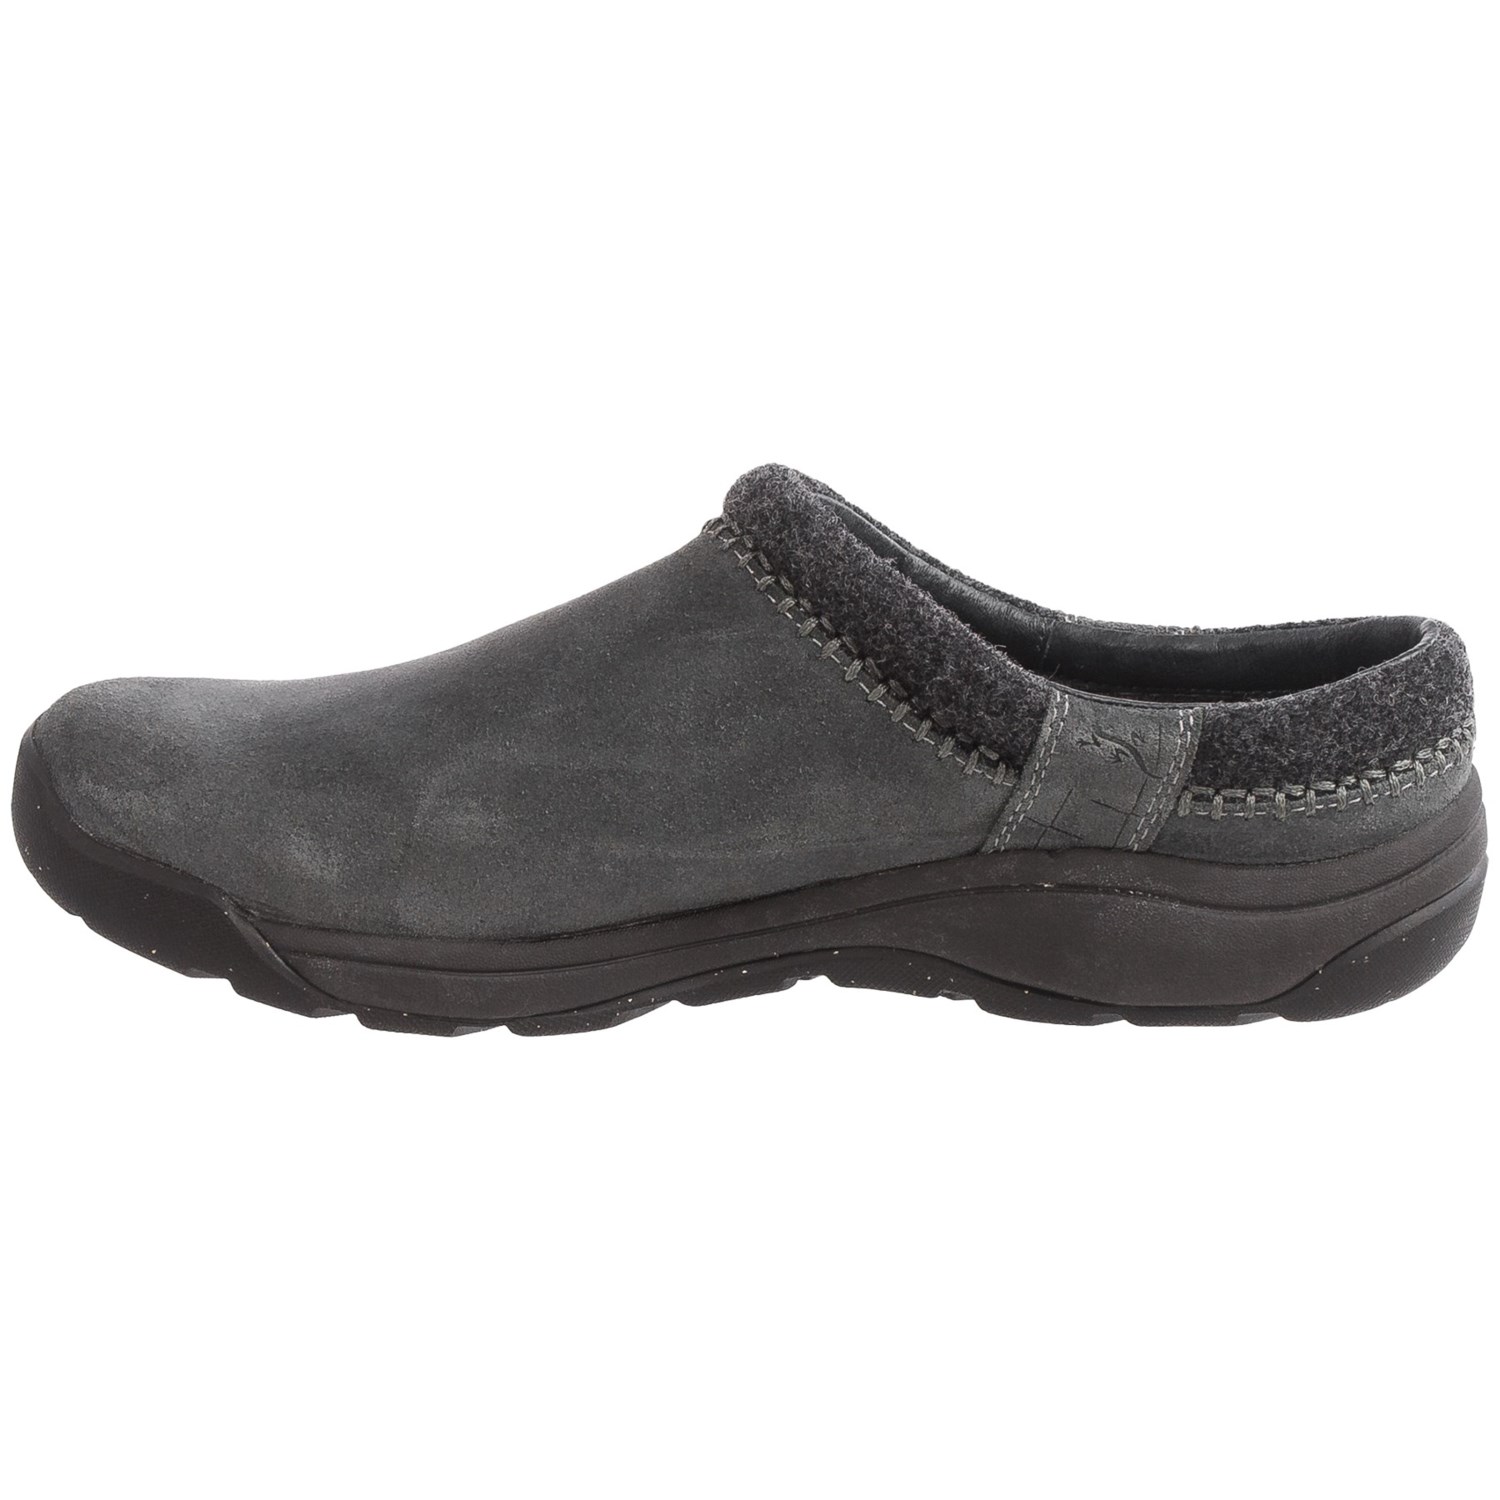 Chaco Zealander Clogs (For Men) - Save 50%